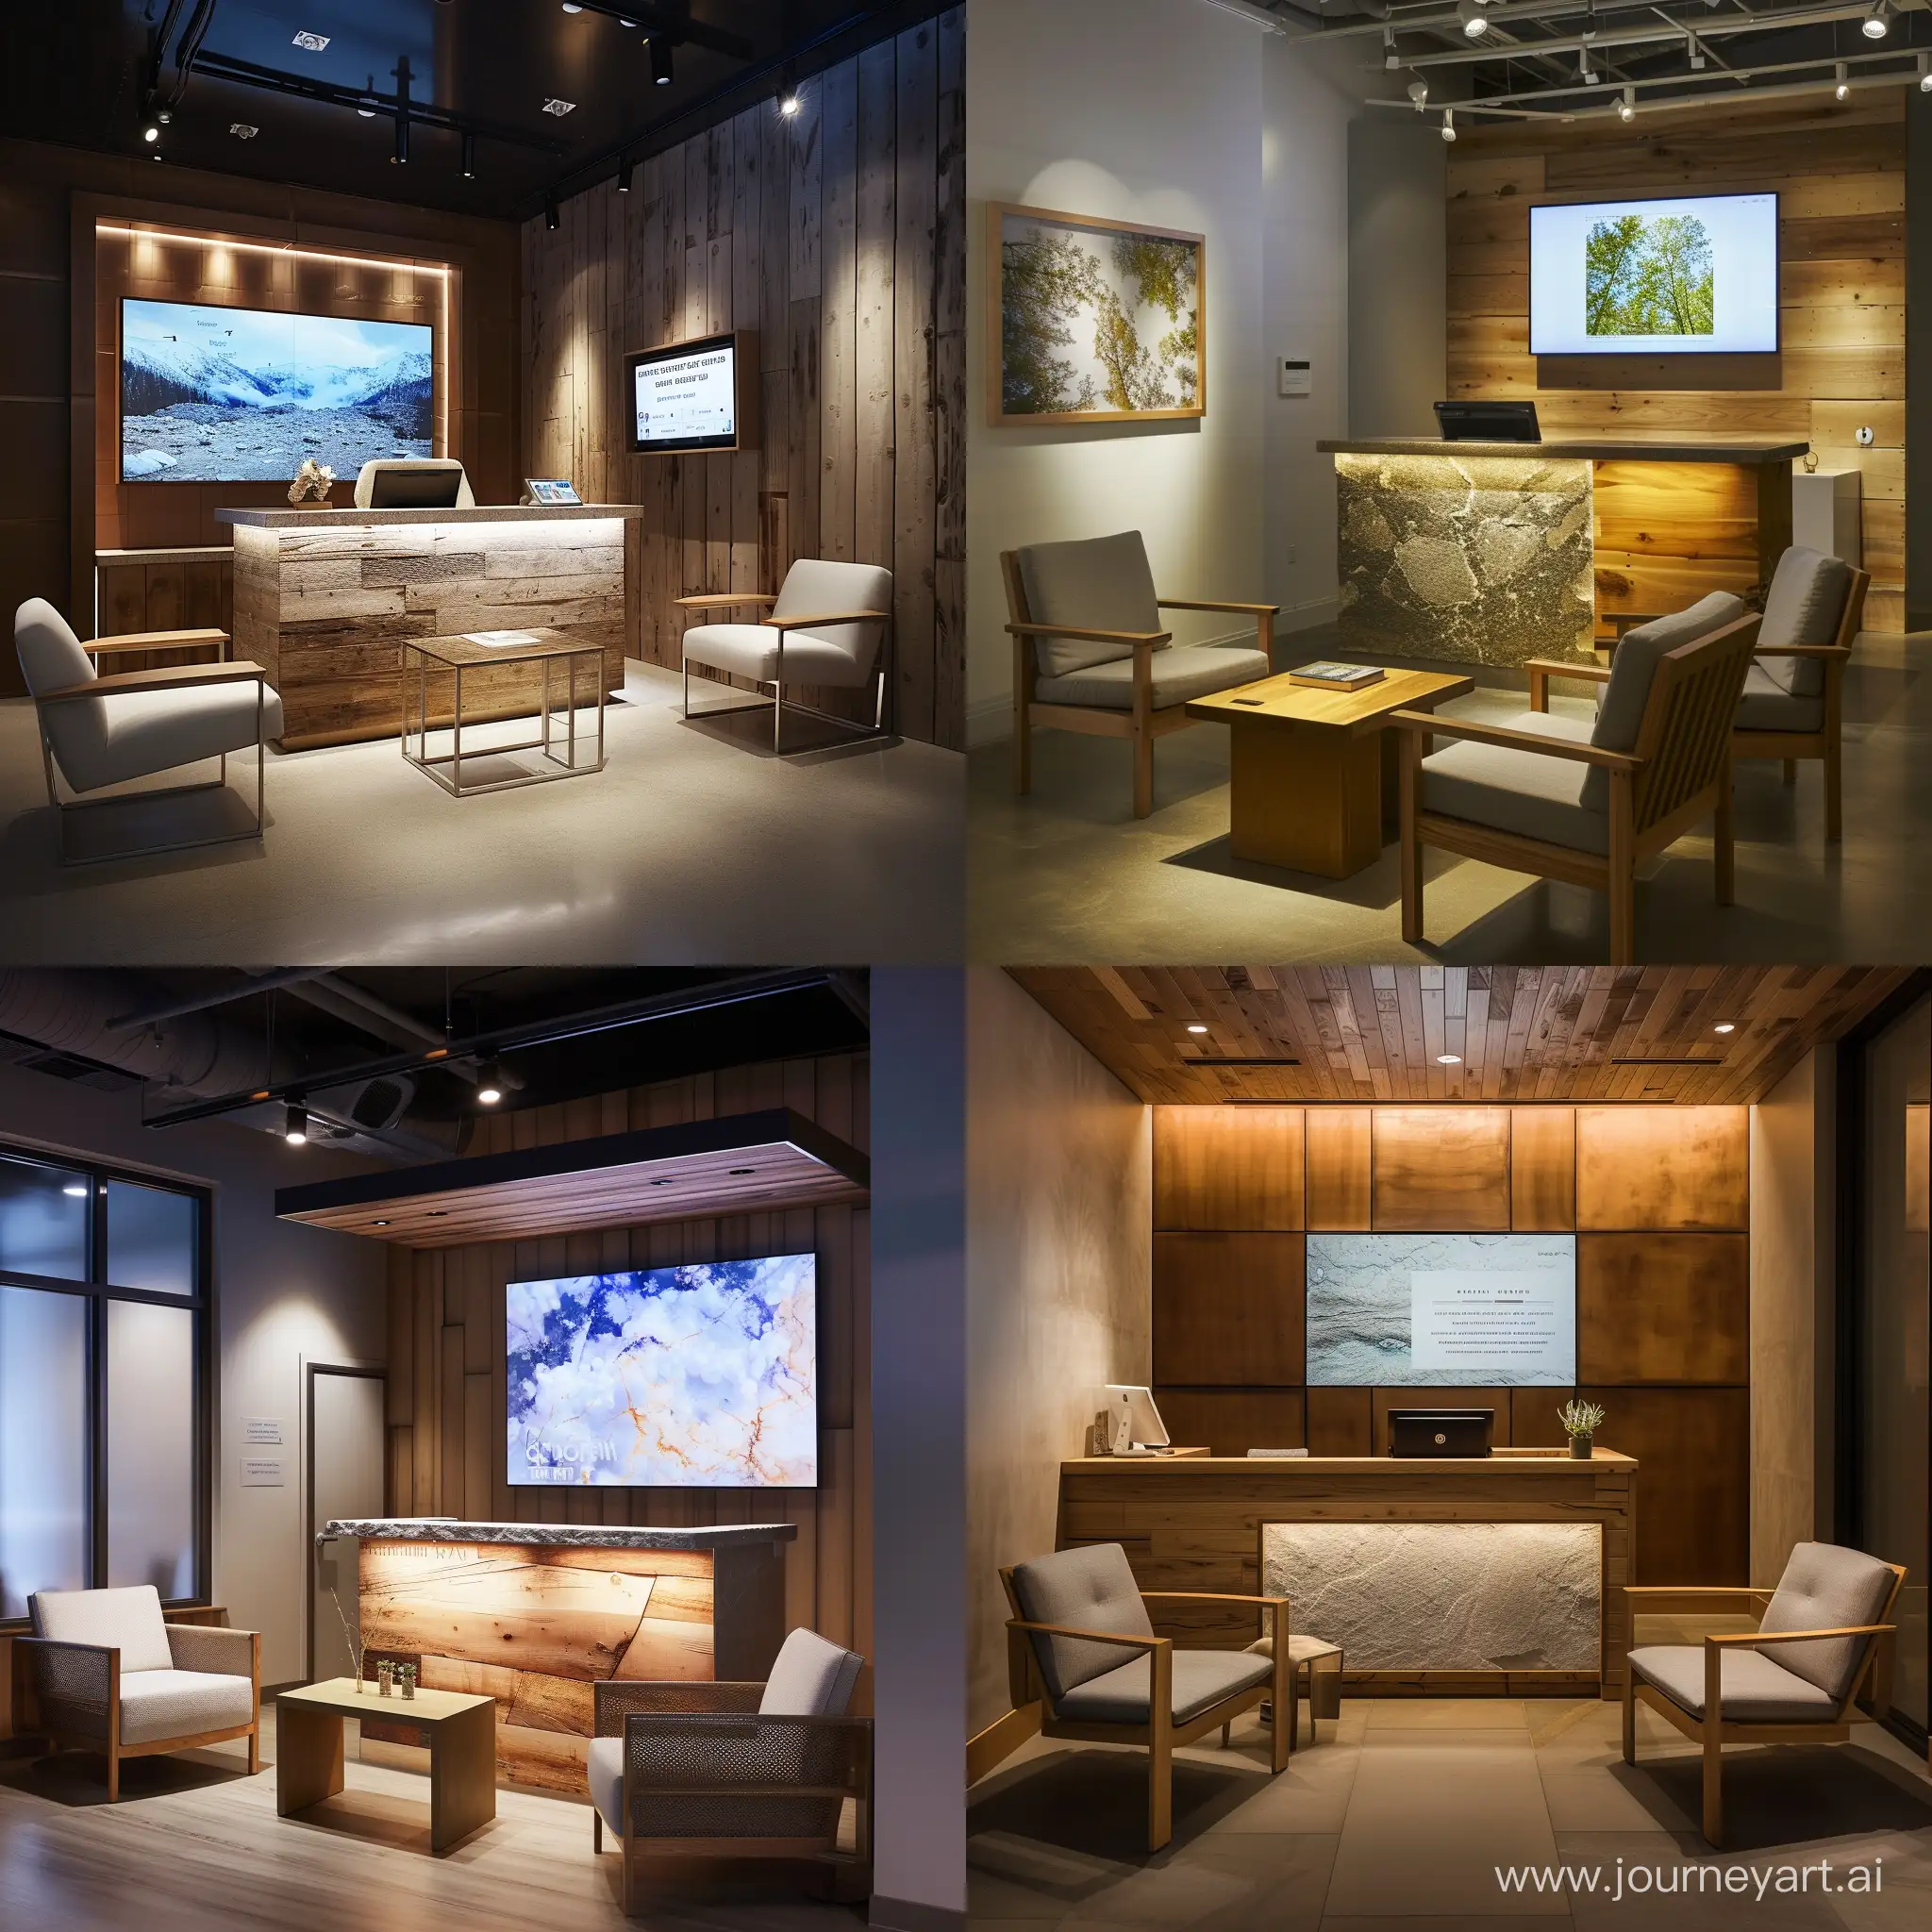 imagine an The small entrance area is designed with a clean and inviting ambiance, utilizing natural and sustainable materials. The reception desk features reclaimed wood with a polished natural stone front panel, creating a sleek contrast. A digital signage/LCD screen mounted behind the reception desk showcases high-resolution imagery highlighting the brand's commitment to sustainability. The seating area includes two armchairs made with recycled aluminum frames and sustainable fabric upholstery, along with a small coffee table made from reclaimed wood. Ambient lighting is achieved through energy-efficient LED lights, with a focused spotlight on the digital screen and warm, diffused lamp in the seating area.realistic style